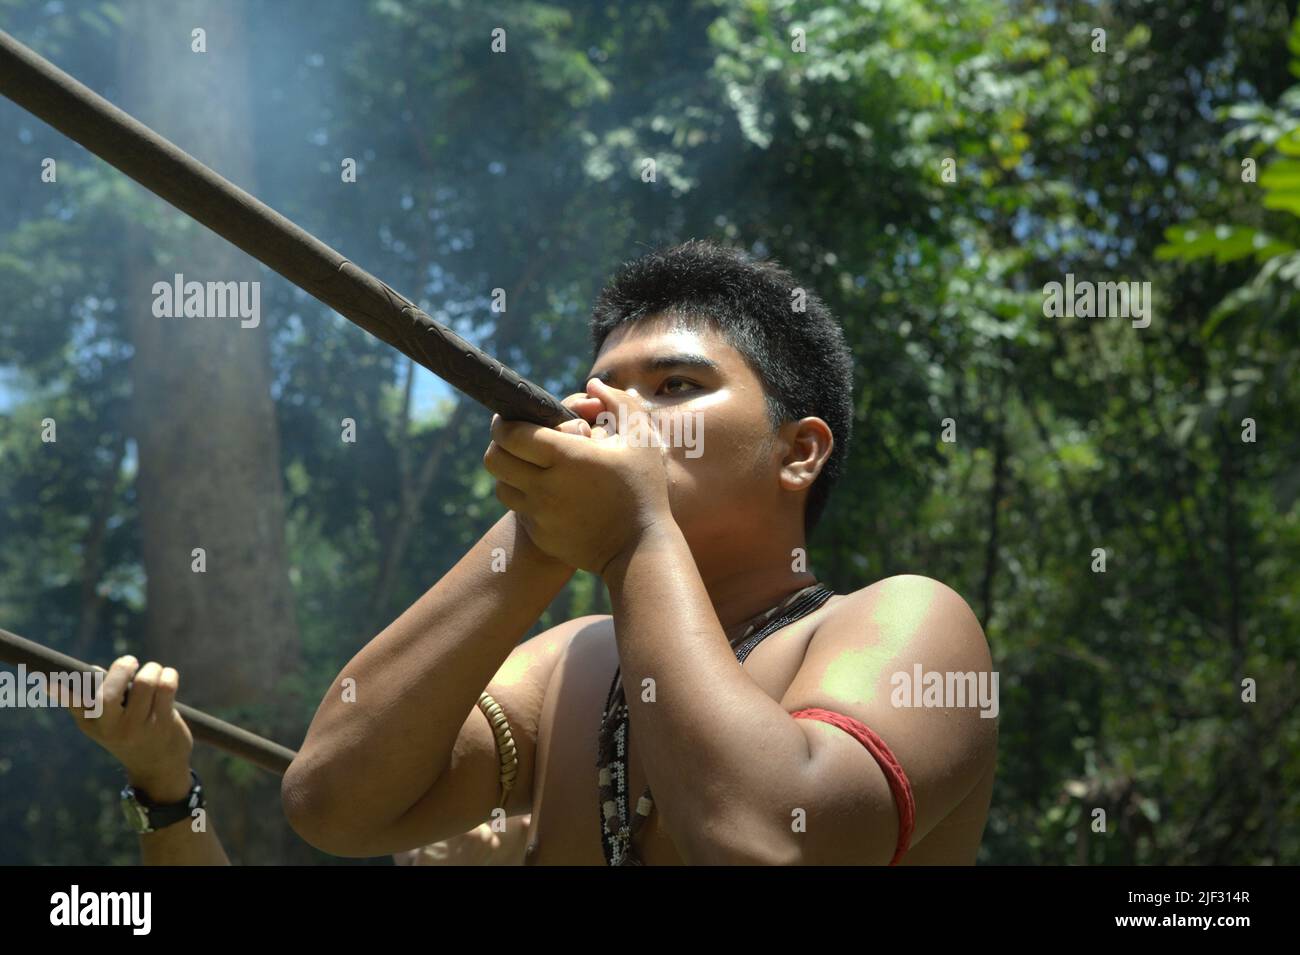 A tourism worker demonstrating an indigenous way of hunting with blowgun at Mari Mari Cultural Village, a village that is designed to showcase the cultures of five ethnic groups of Sabah—a Malaysian state in North Borneo, which is located on the outskirts of Kota Kinabalu in Sabah, Malaysia. Stock Photo